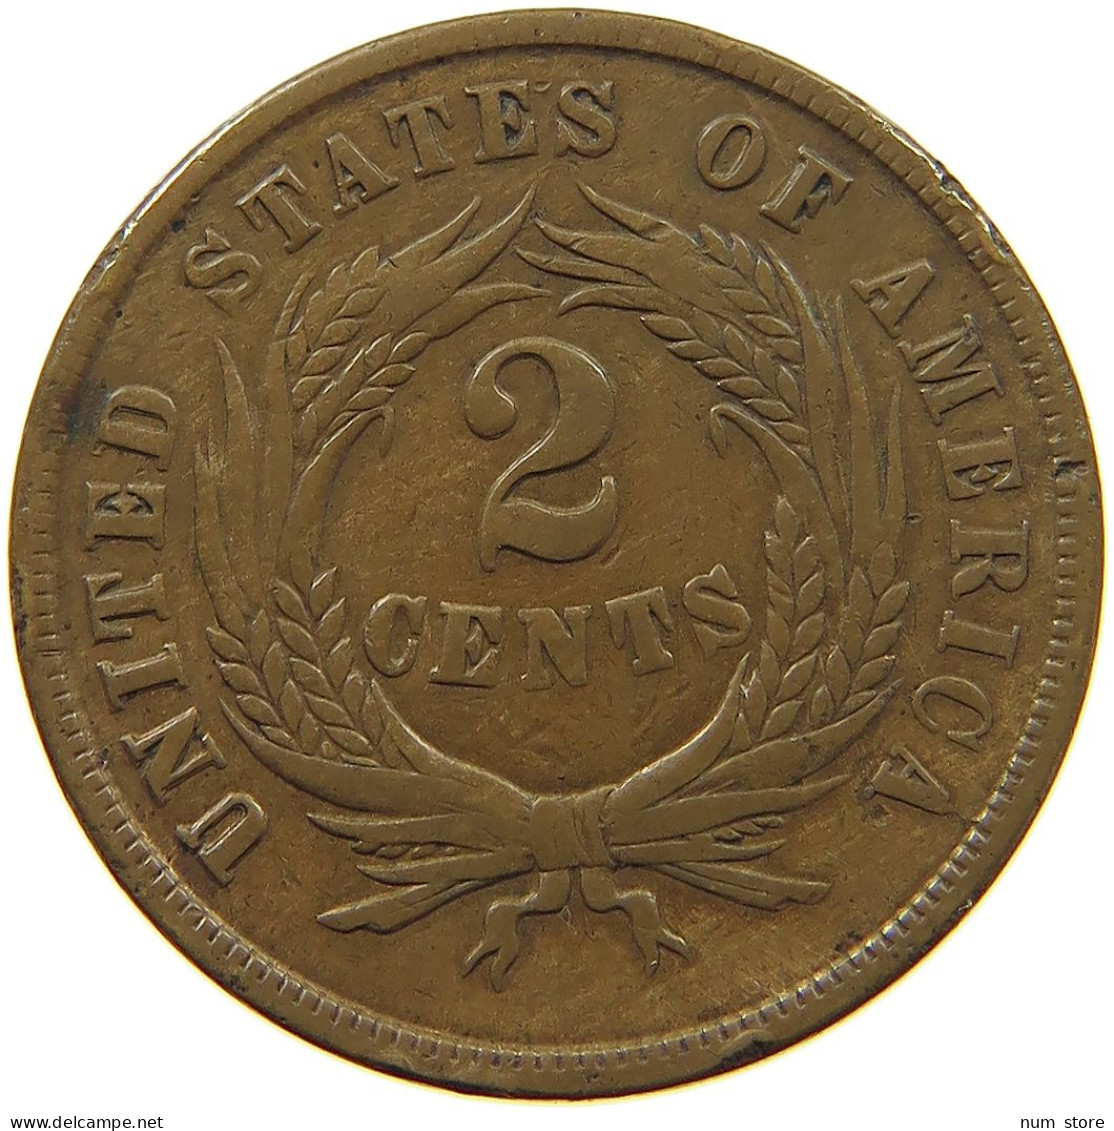 UNITED STATES OF AMERICA 2 CENTS 1864  #c010 0119 - 2, 3 & 20 Cent